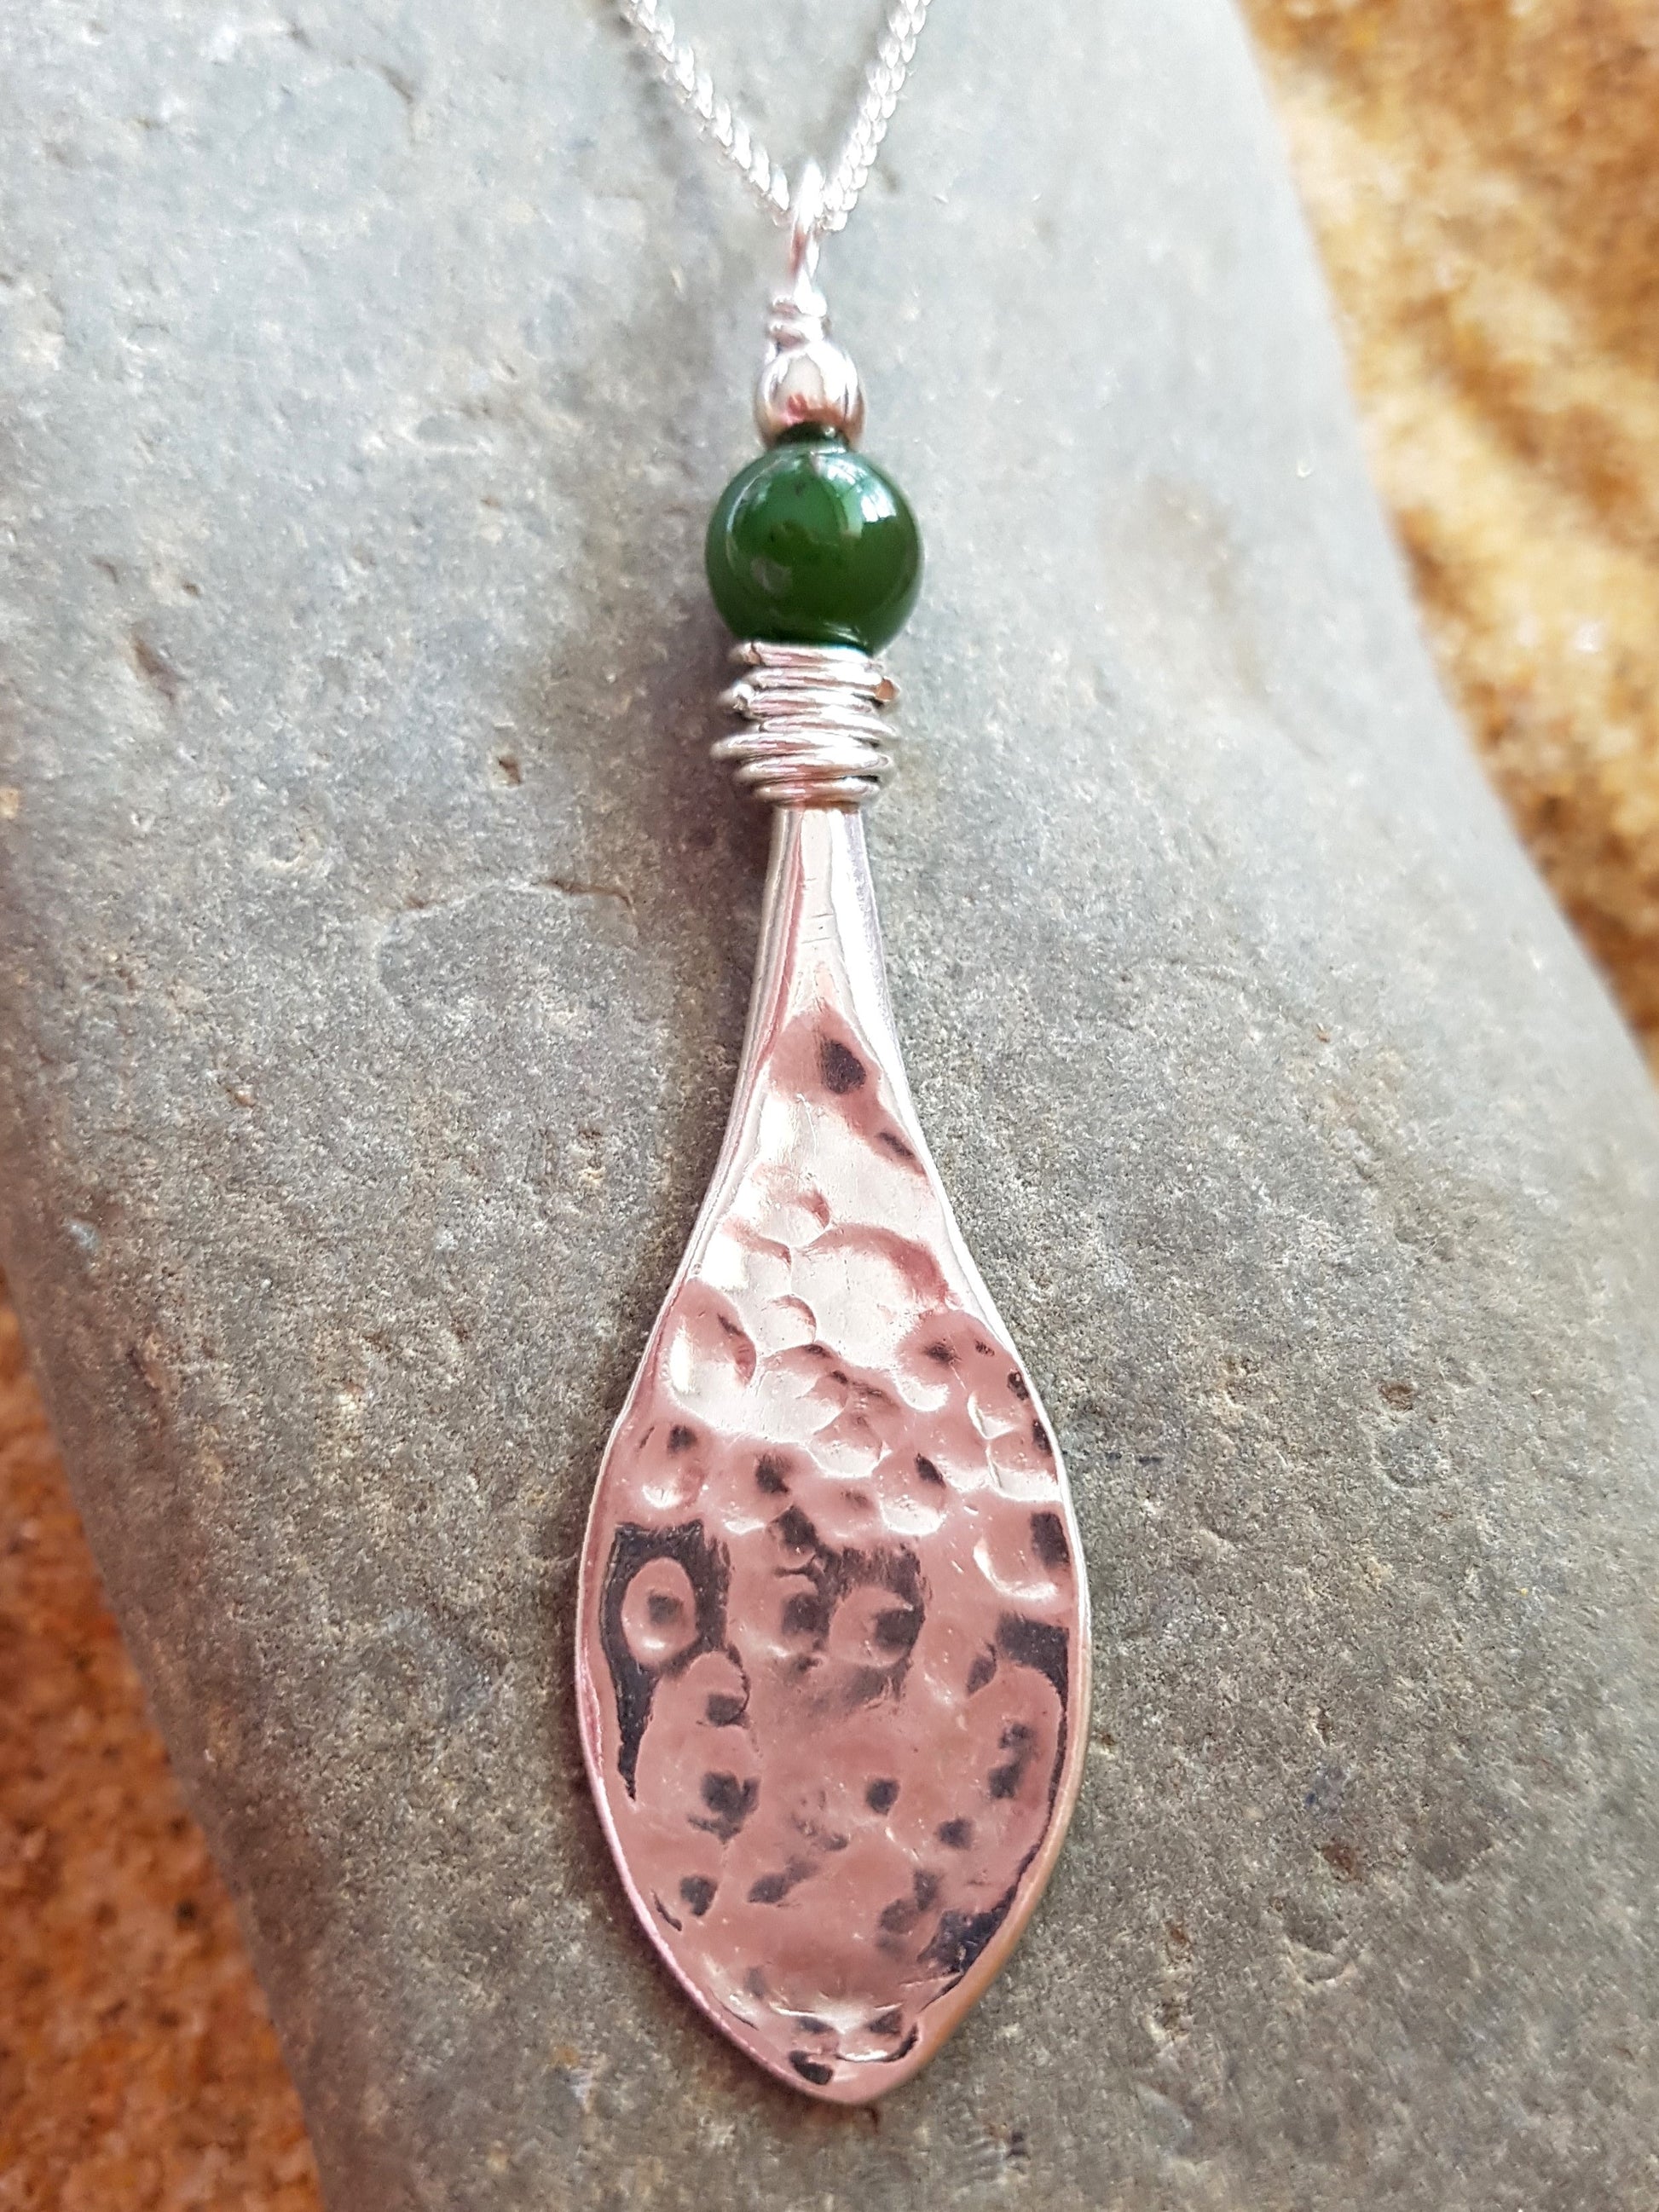 Vintage Jade River Paddle Pendant, Sterling Silver pendant with green Jade Stone